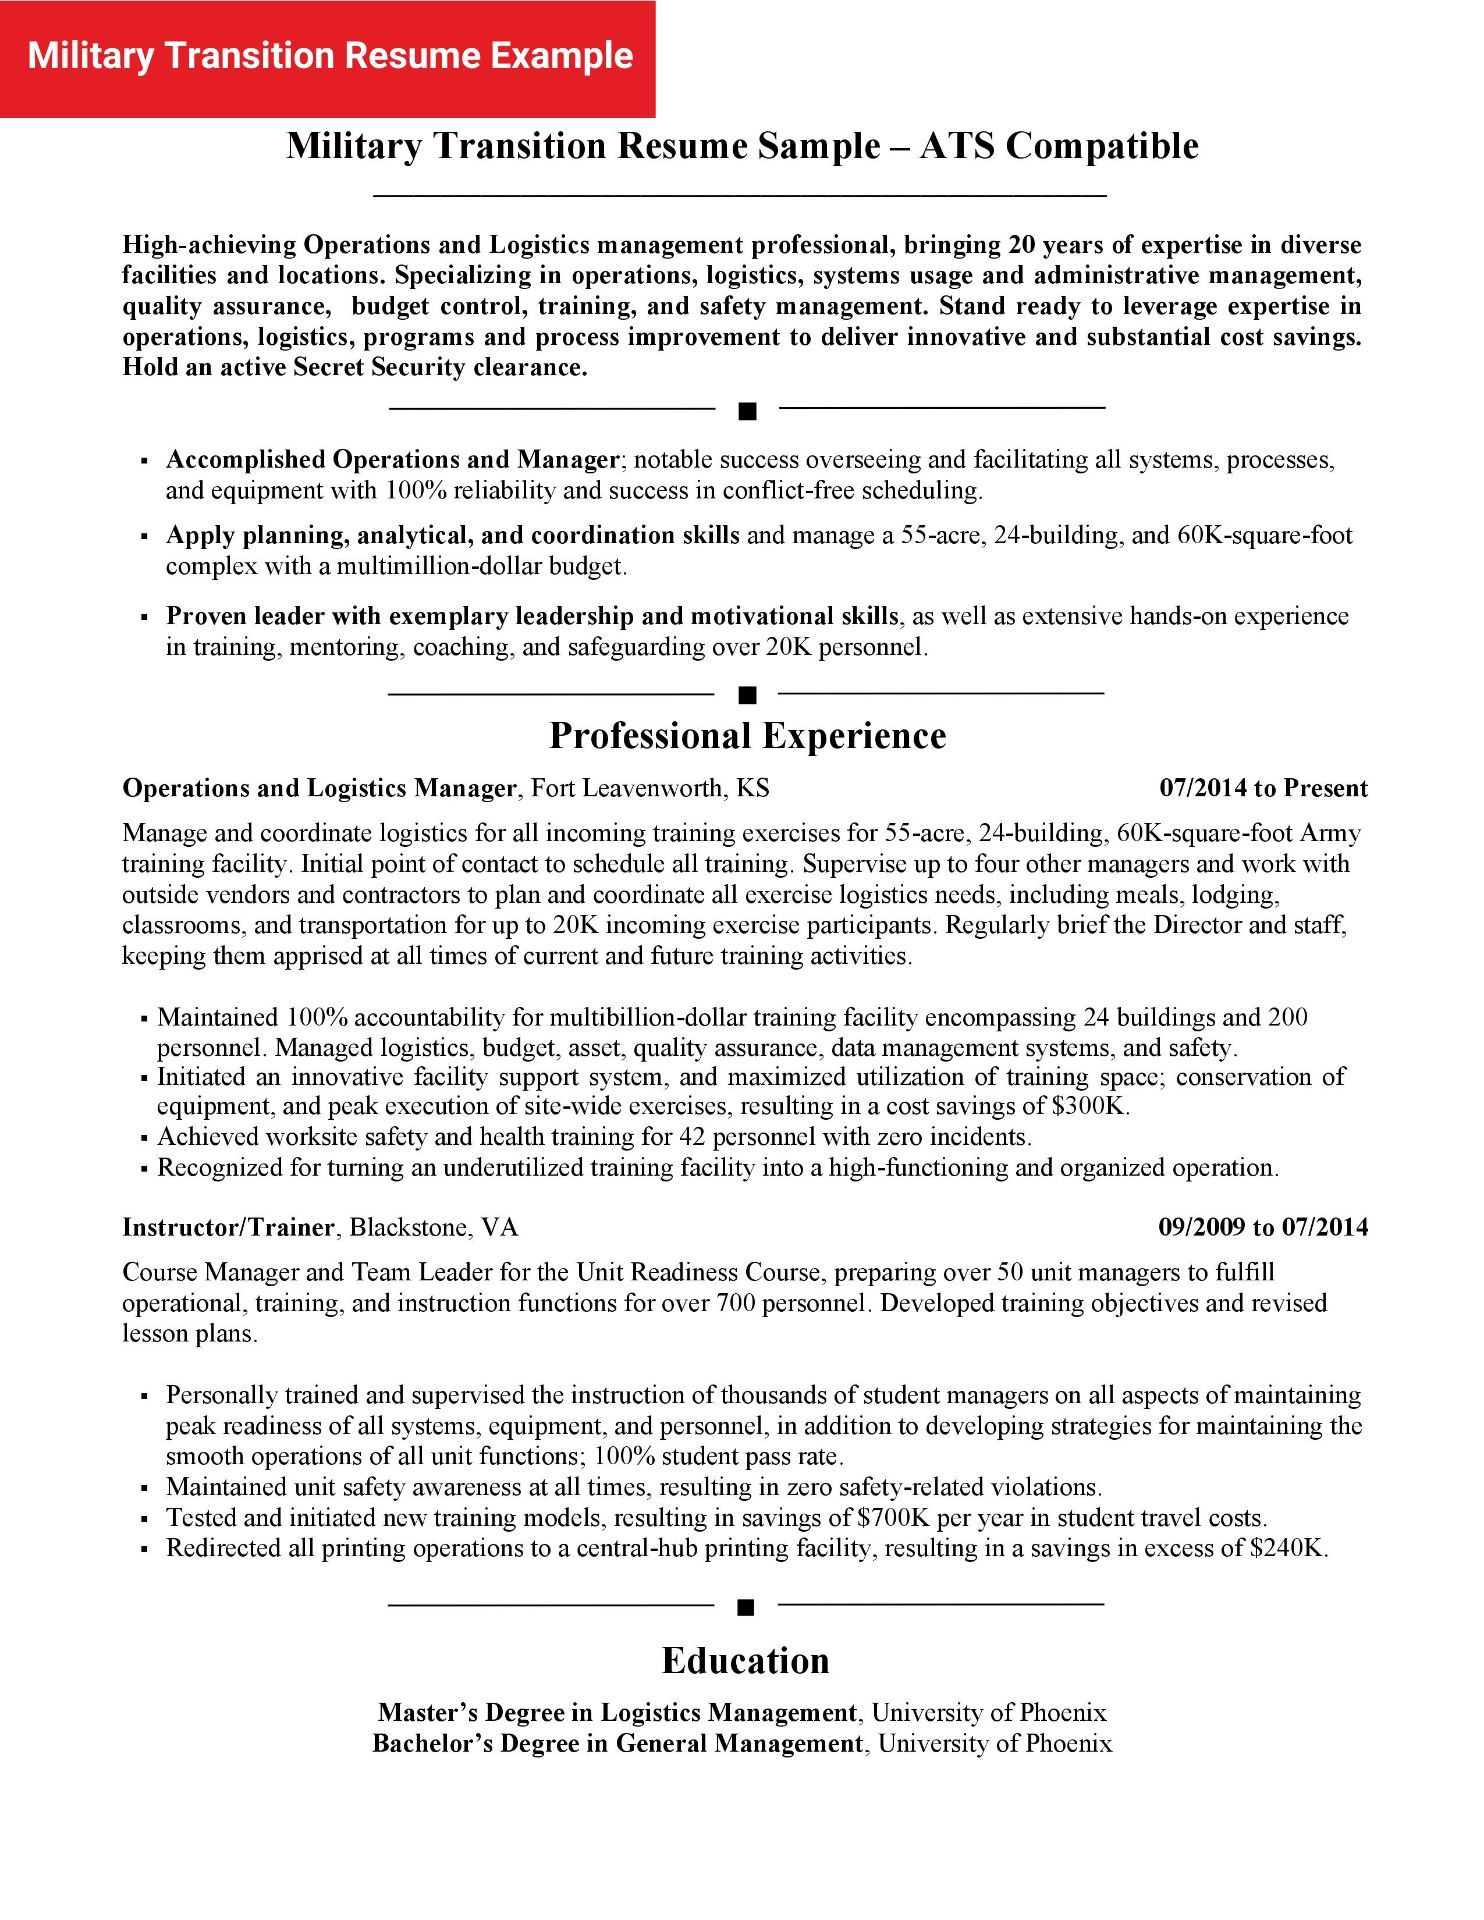 Sample Resume for Veterans Employment Representative 7 Free Federal Resume Samples & Writing Tips and Trends